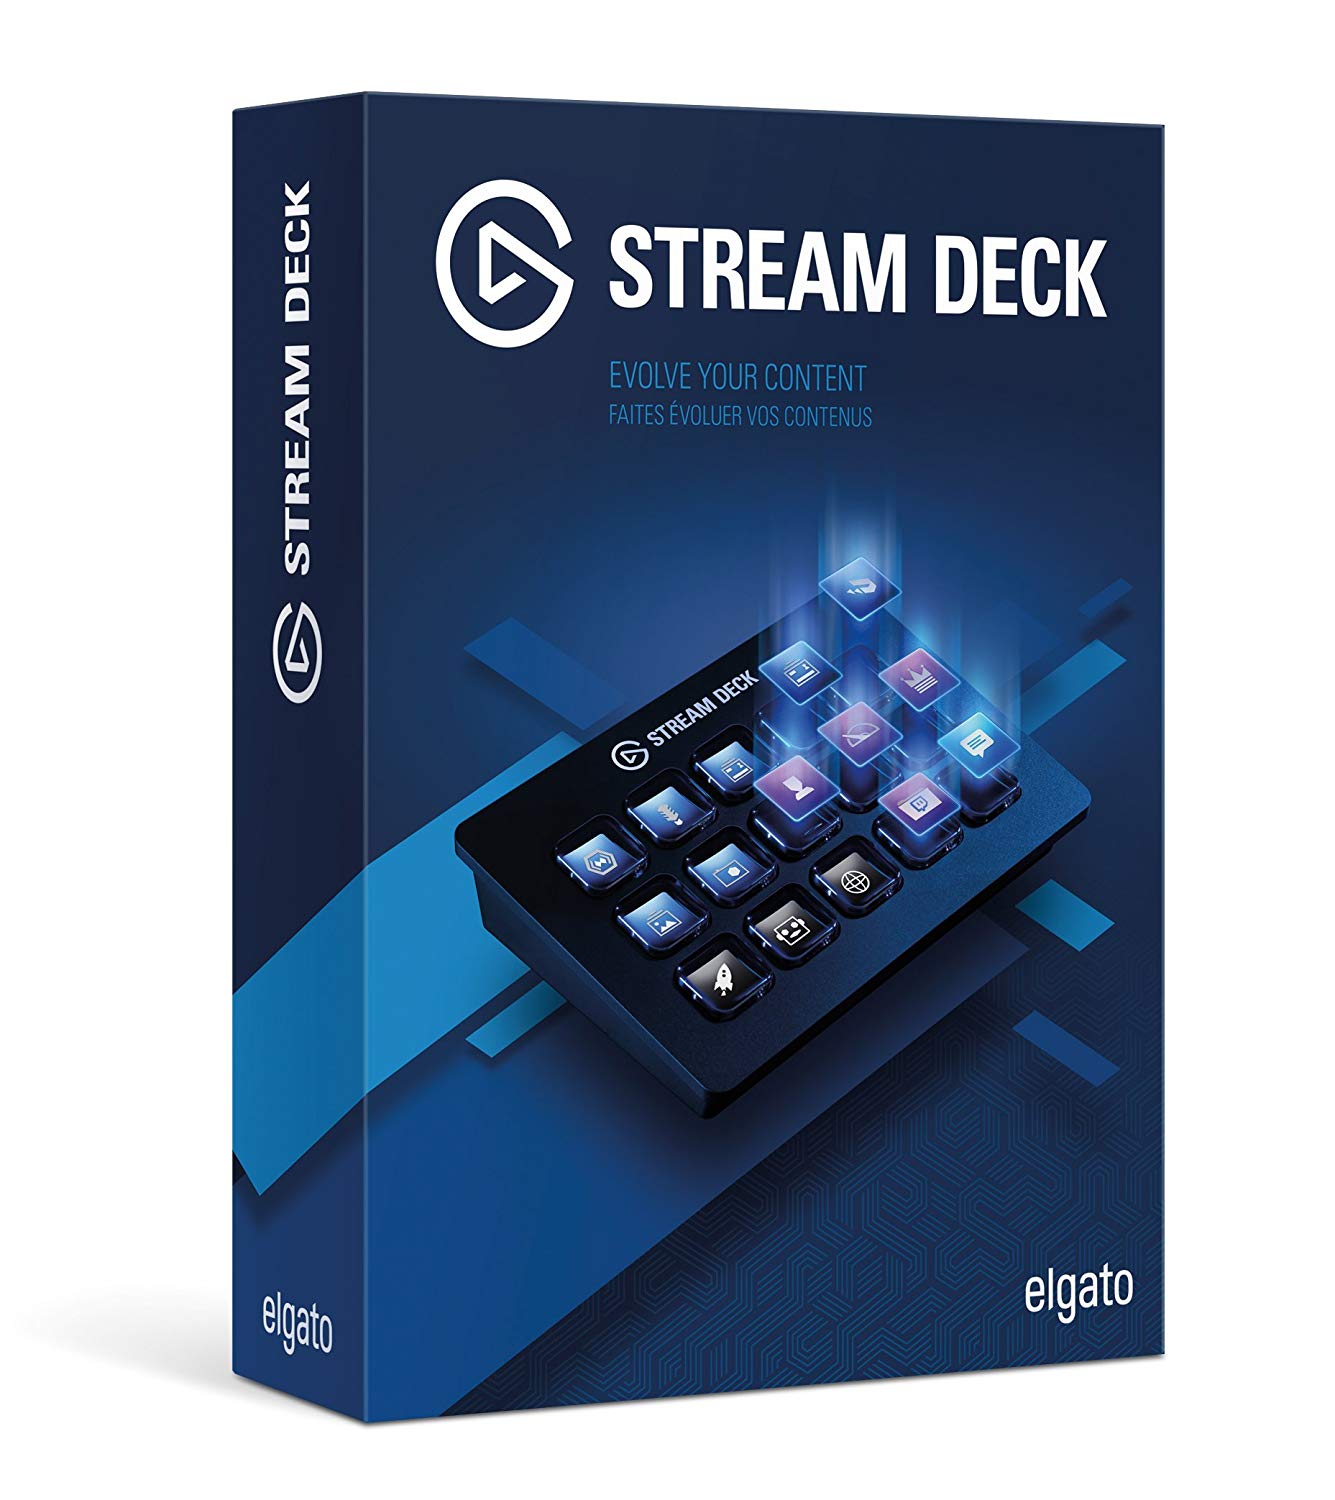 Elgato Stream Deck - Live Content Creation Controller with 15 customizable LCD keys, adjustable stand, for Windows 10 and macOS 10.11 or later